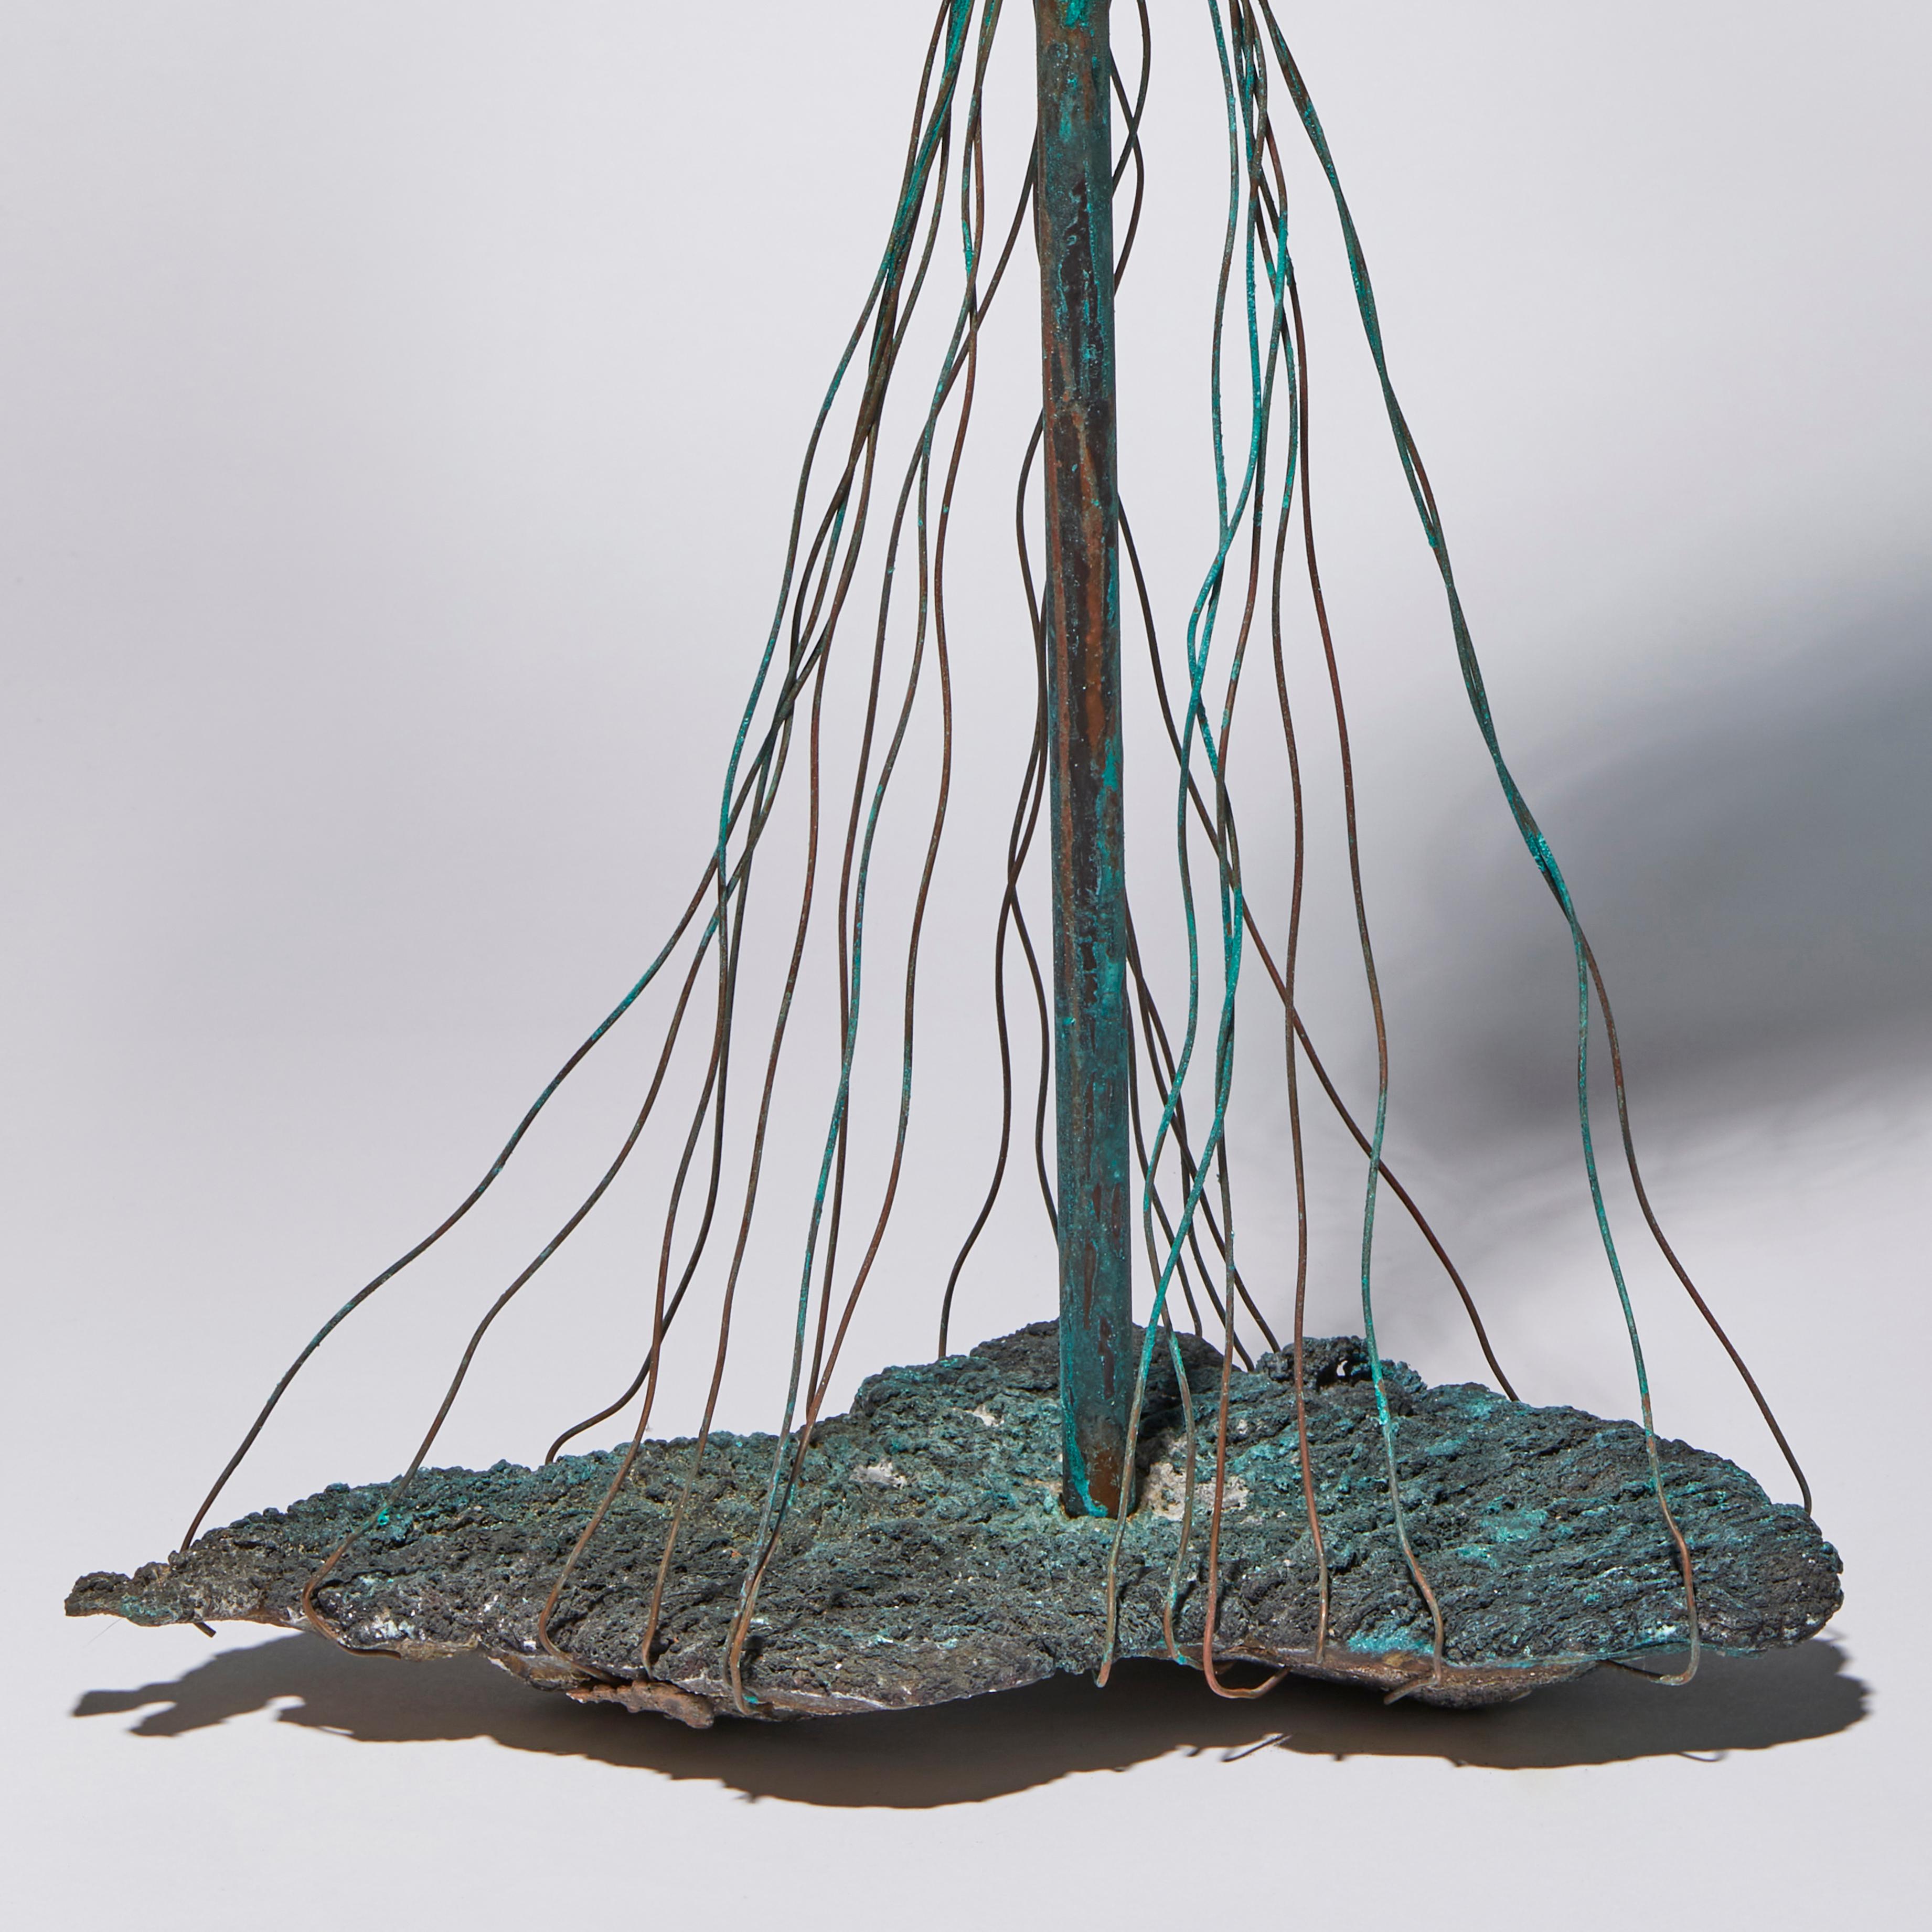 Impostor Syndrome, a Unique Glass, Bronze and Copper Sculpture by Chris Day 1